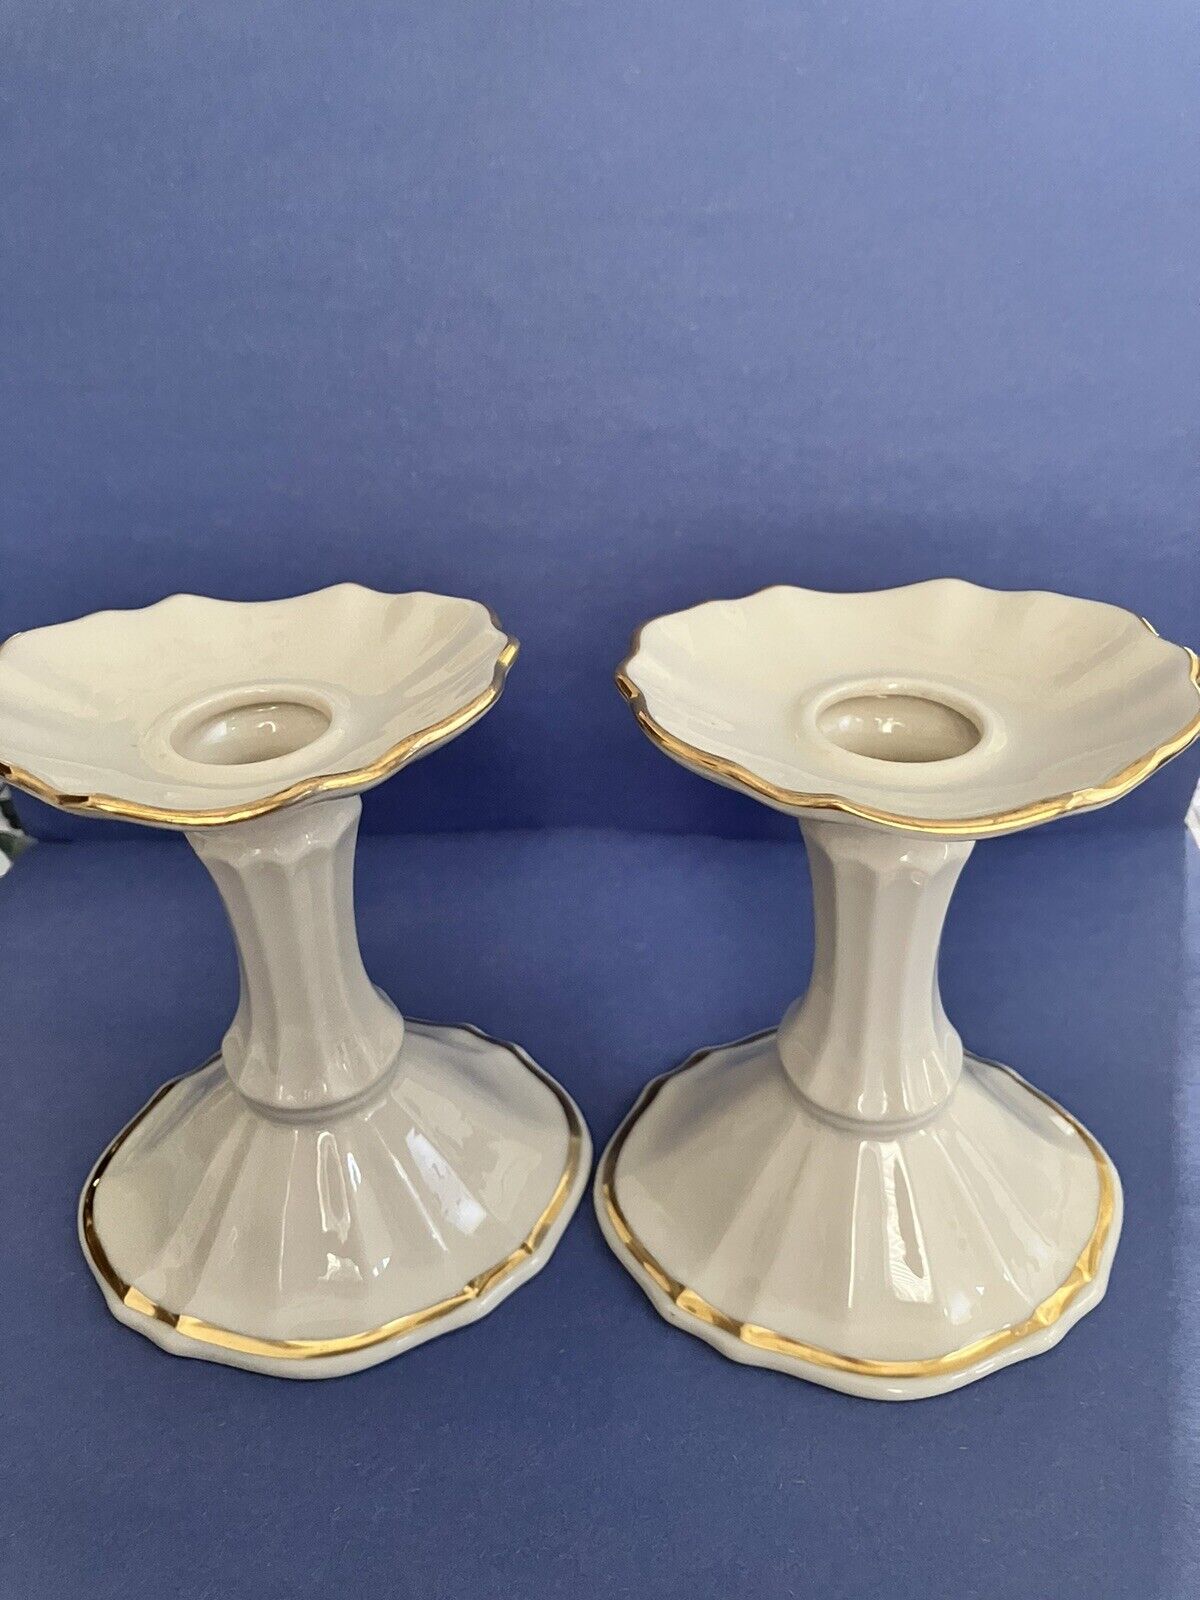 Vintage Lenox Symphony Pair Of Candlesticks Made In The USA